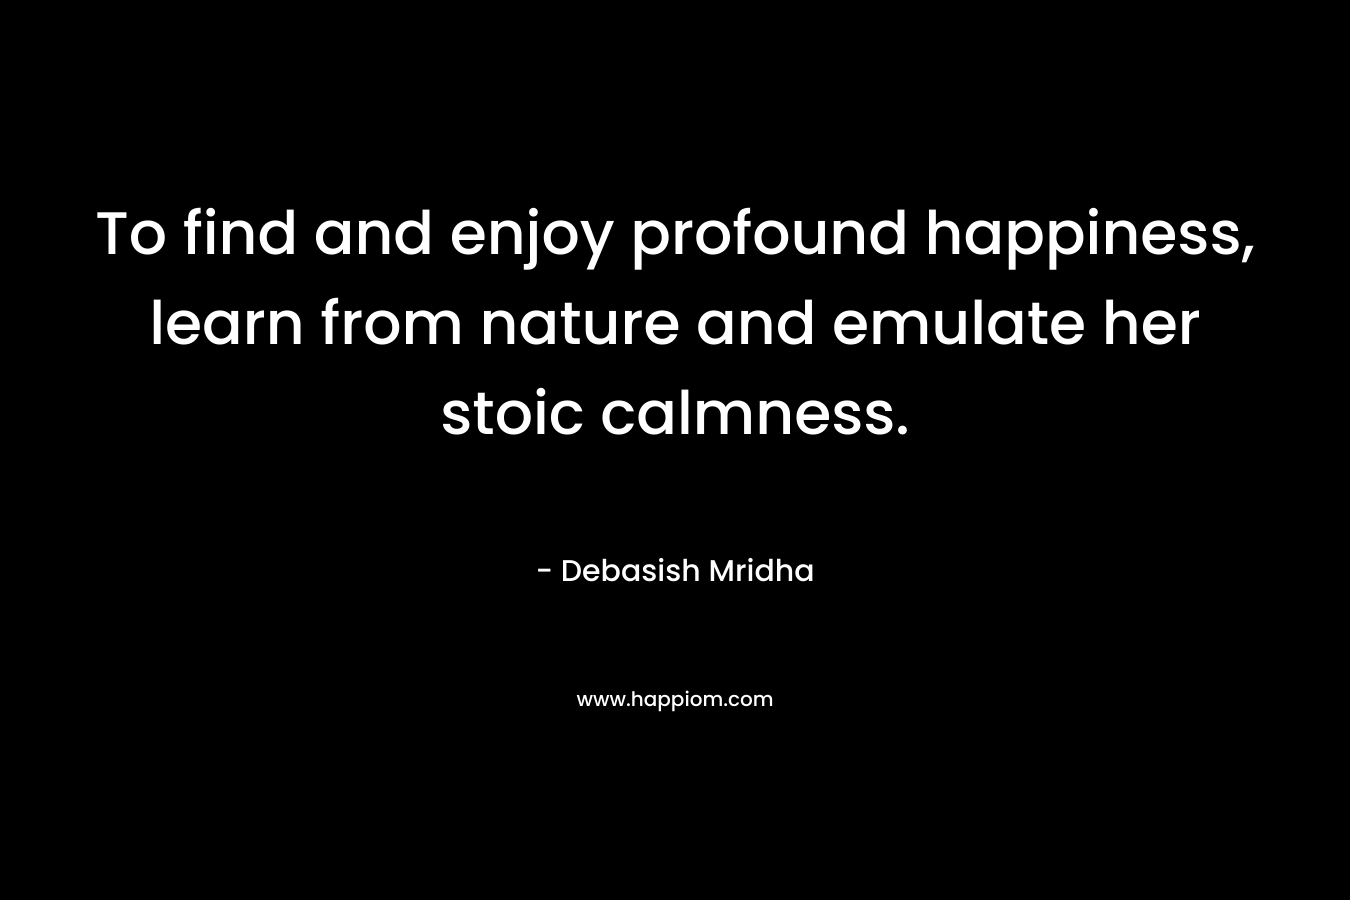 To find and enjoy profound happiness, learn from nature and emulate her stoic calmness.